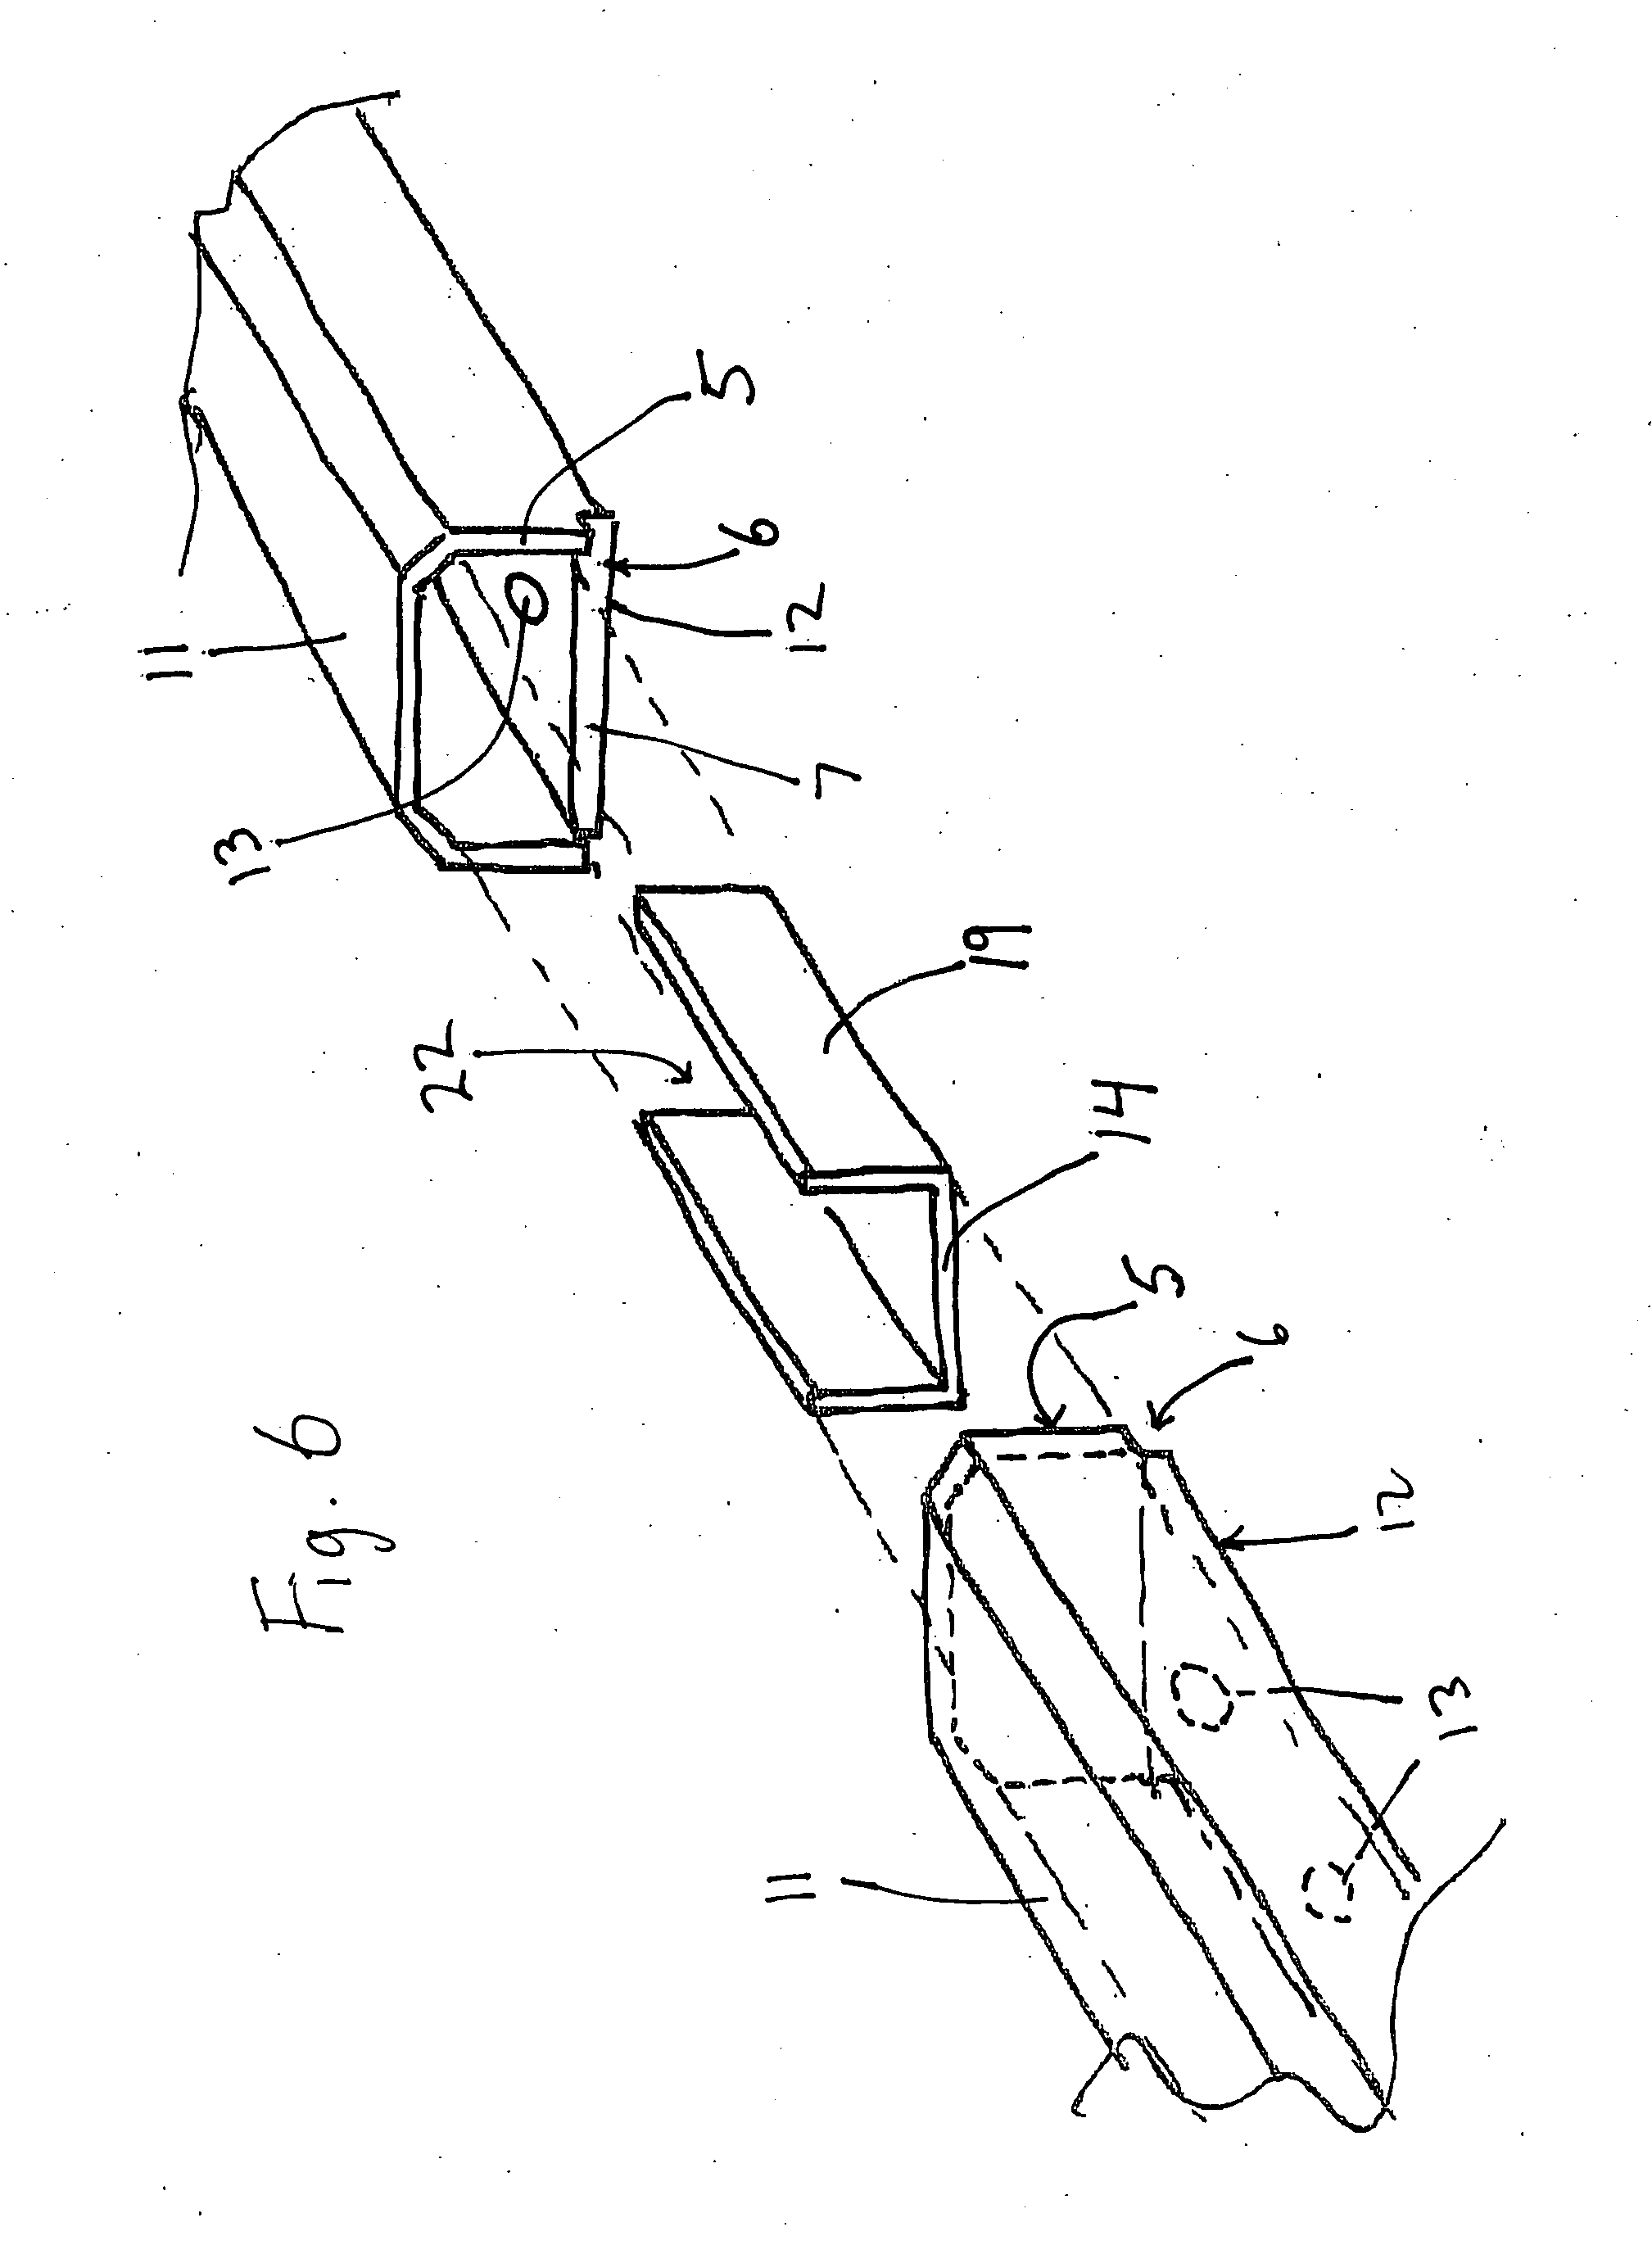 Process for joining hollow section strips by welding